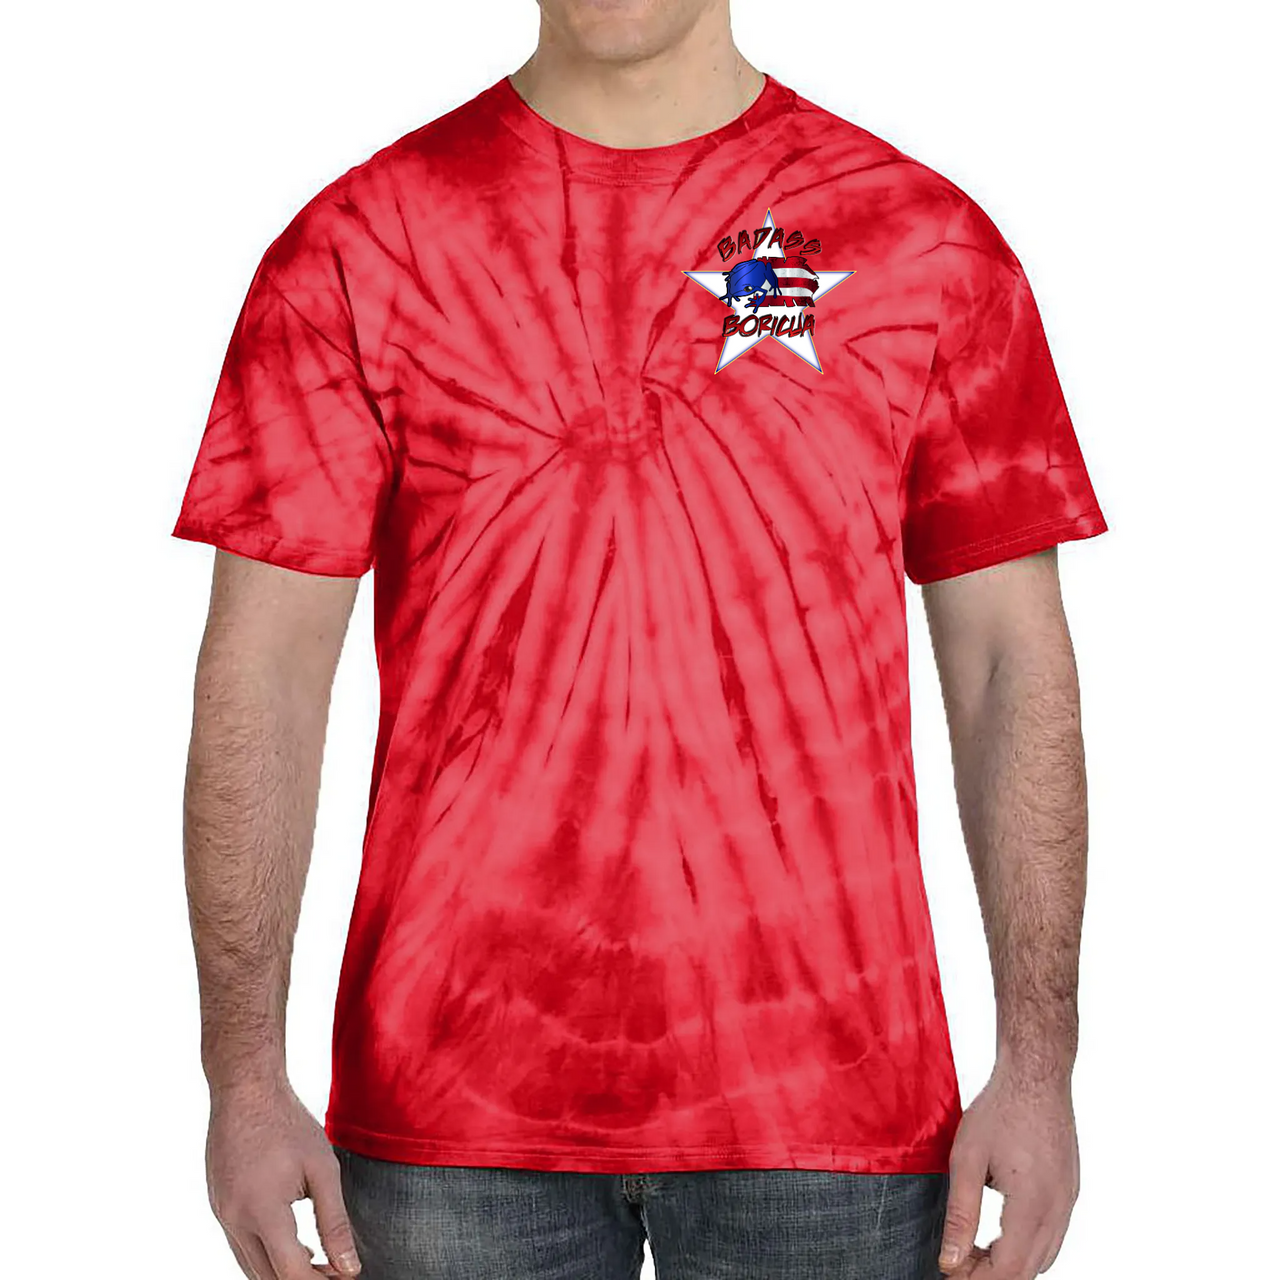 Badass Boricua Front and Back Image Tie-Dye T-Shirt